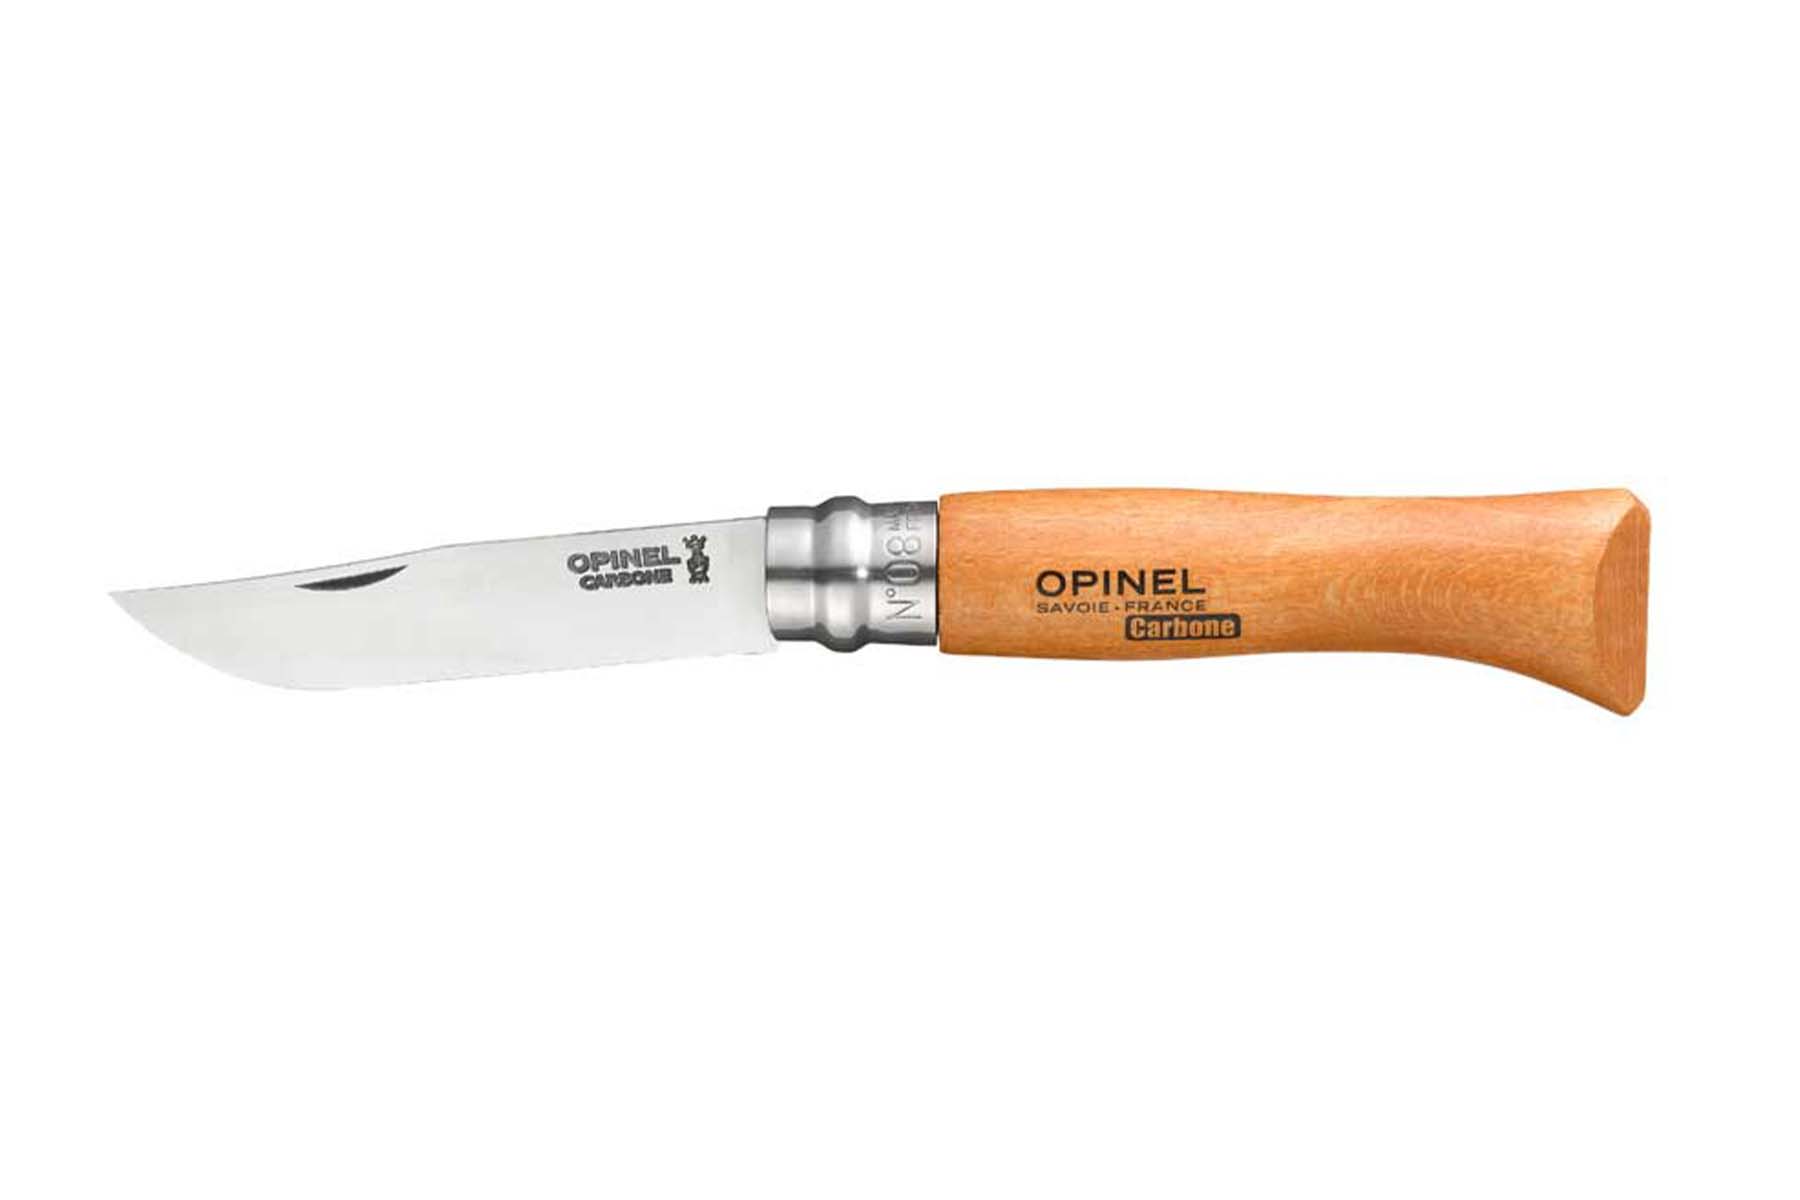 Couteau Opinel n°08 lame carbone